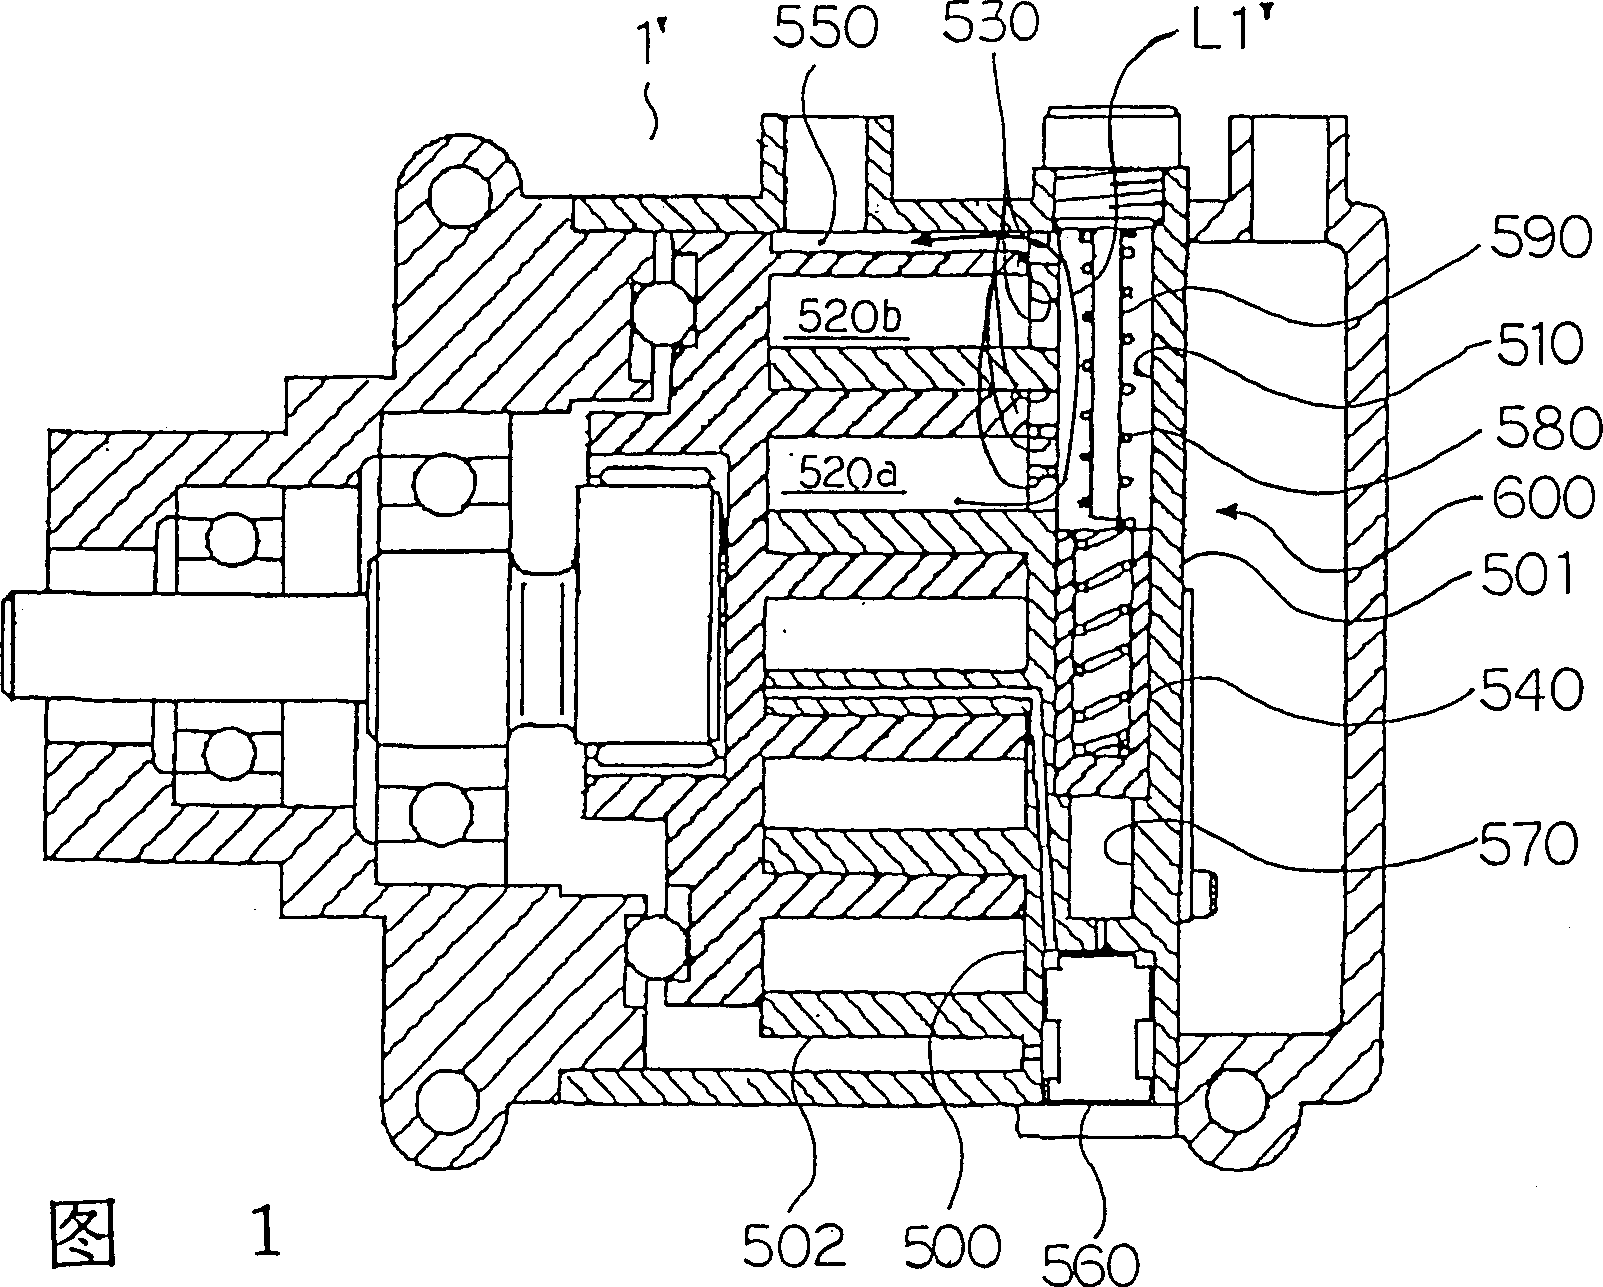 Scroll-type compressor with variable displacement mechanism